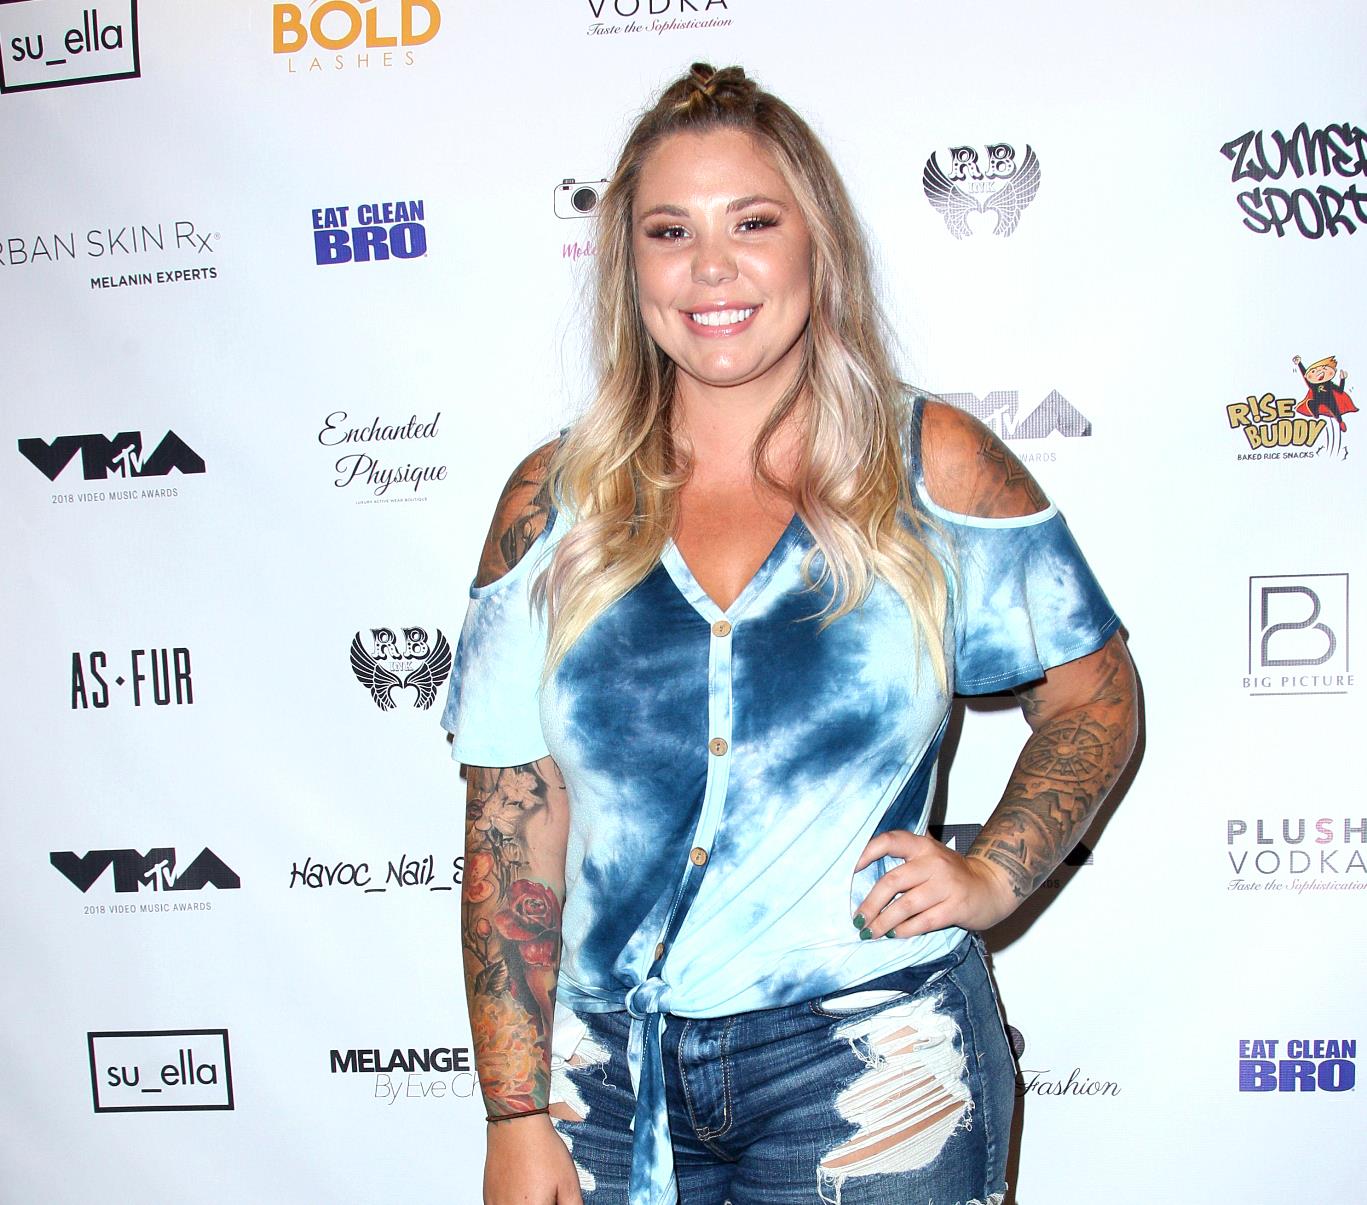 Teen Mom 2 Star Kailyn Lowry is Pregnant With Her 4th Child, Find Out How Far Along She is and if She Revealed Her Baby Daddy's Identity